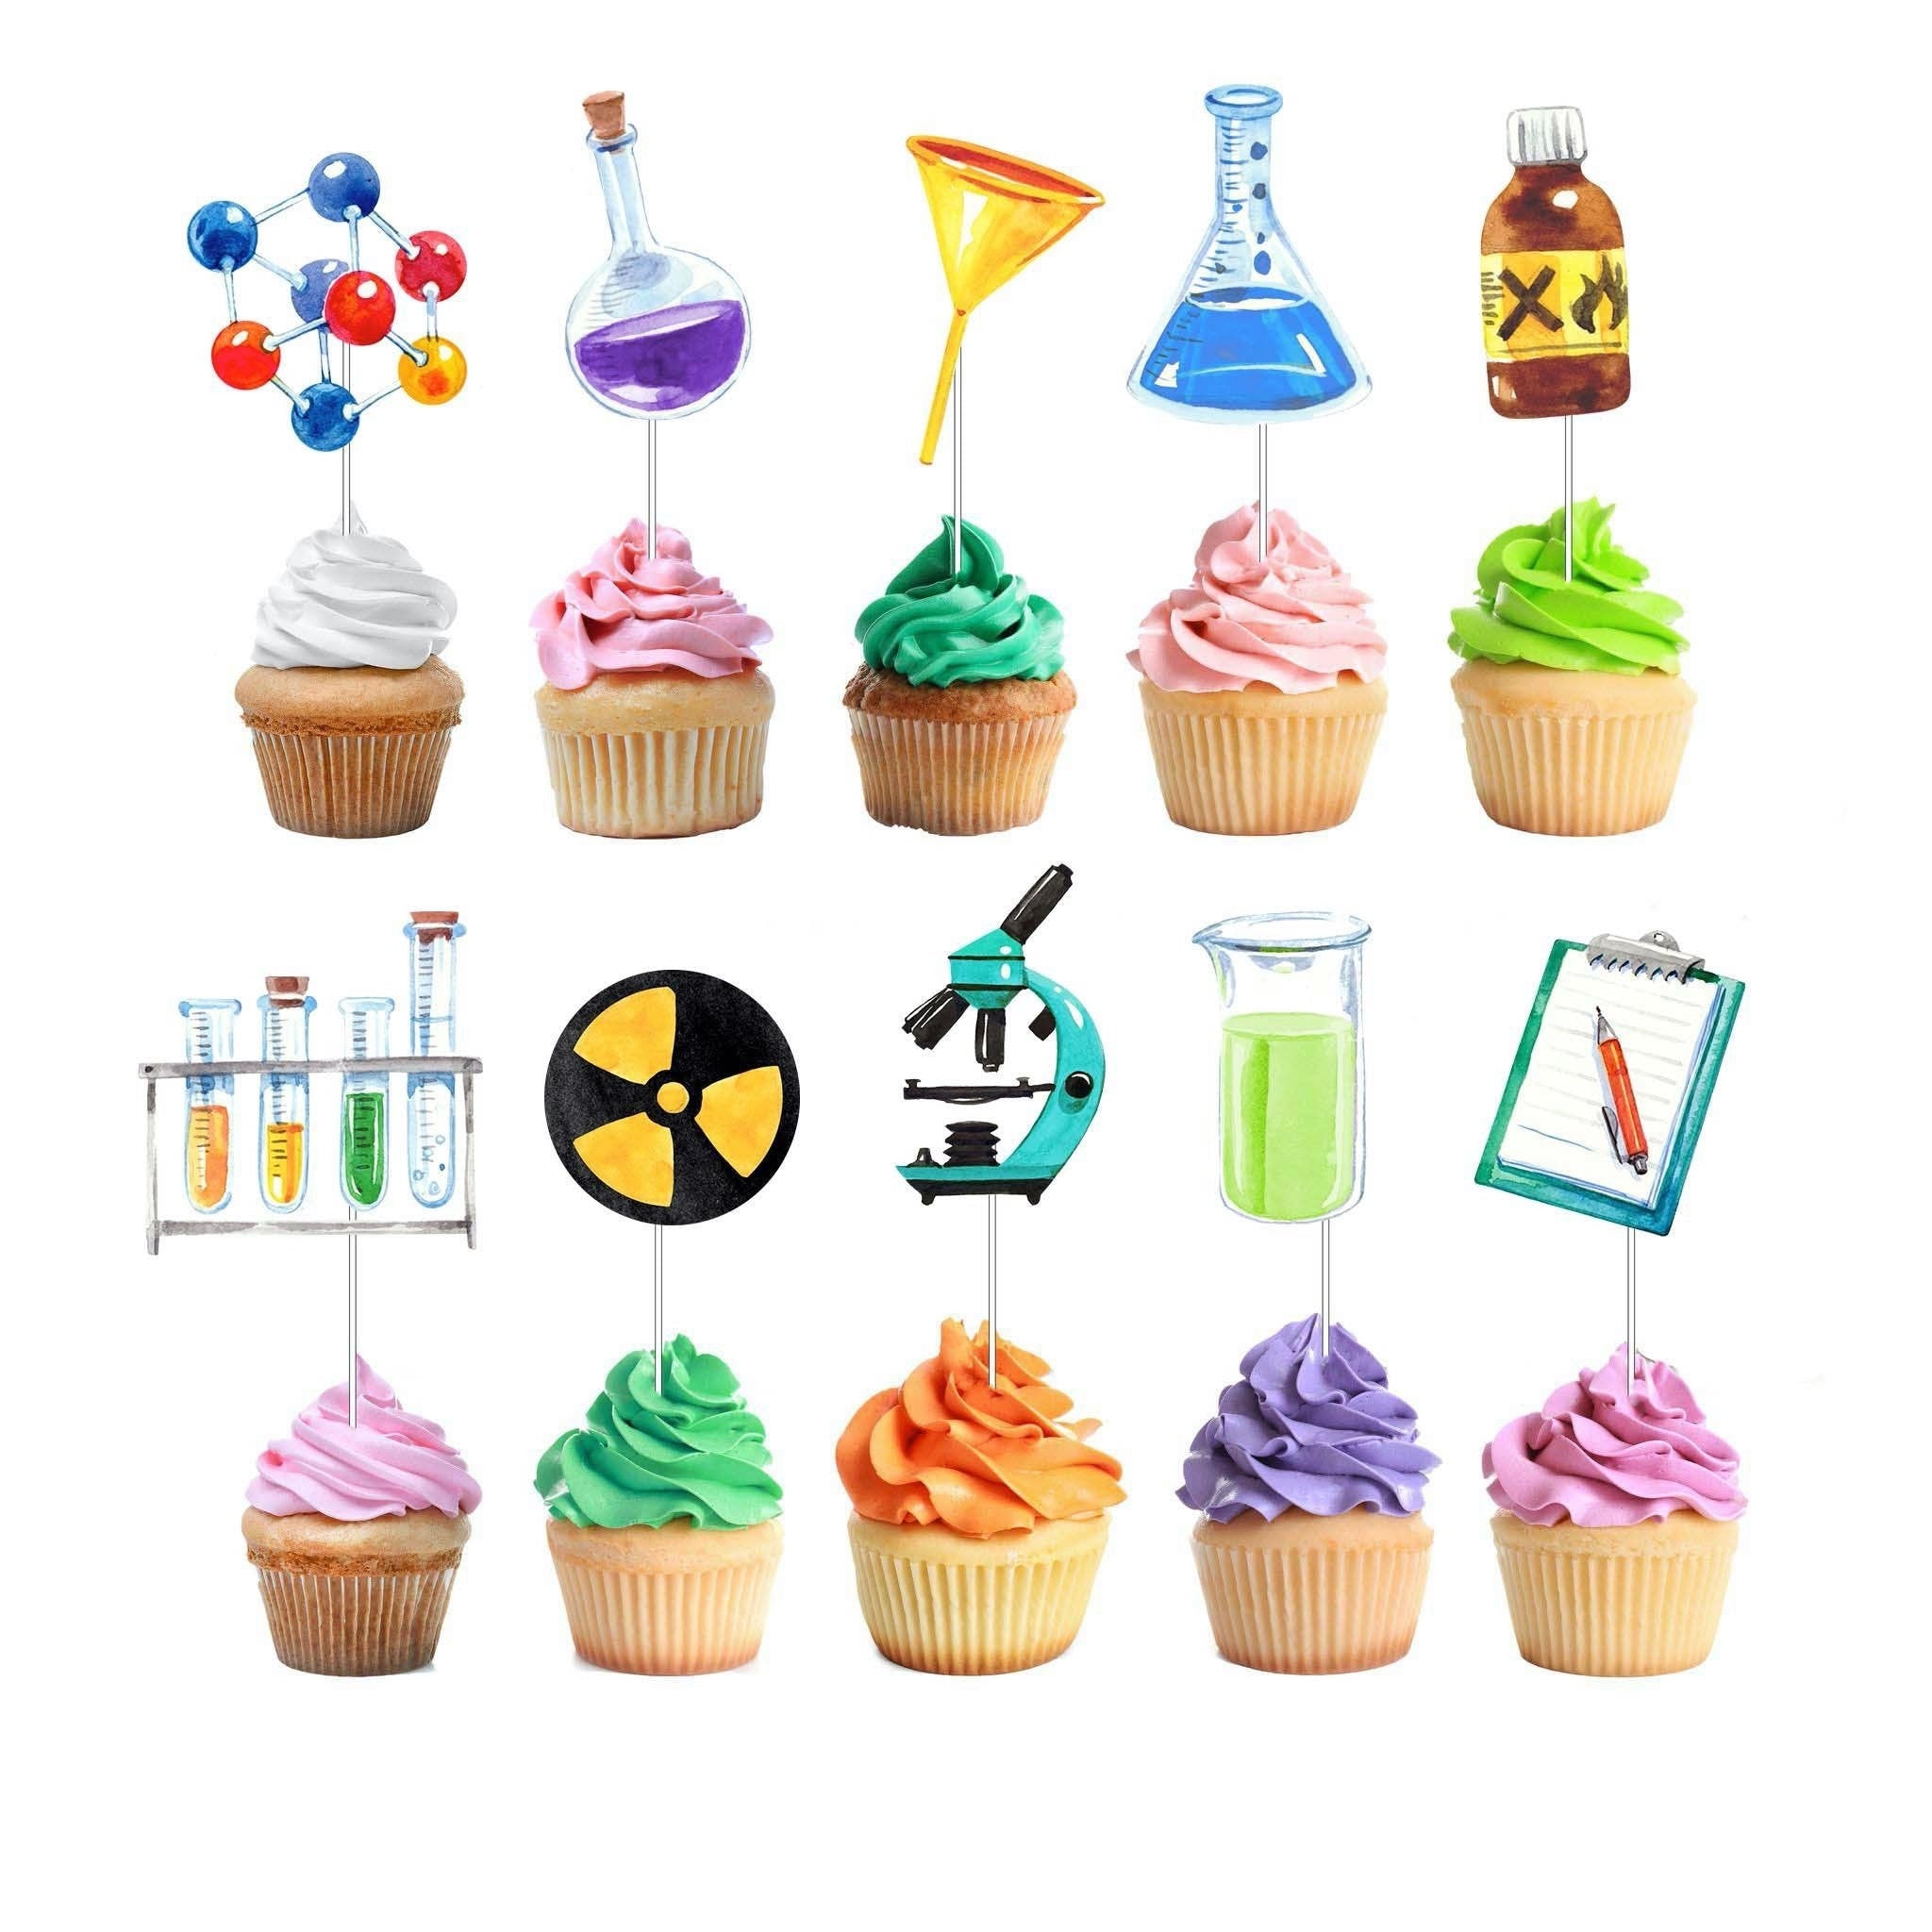 Eureka! Science Cupcake Toppers - Celebrate Discovery and Innovation!